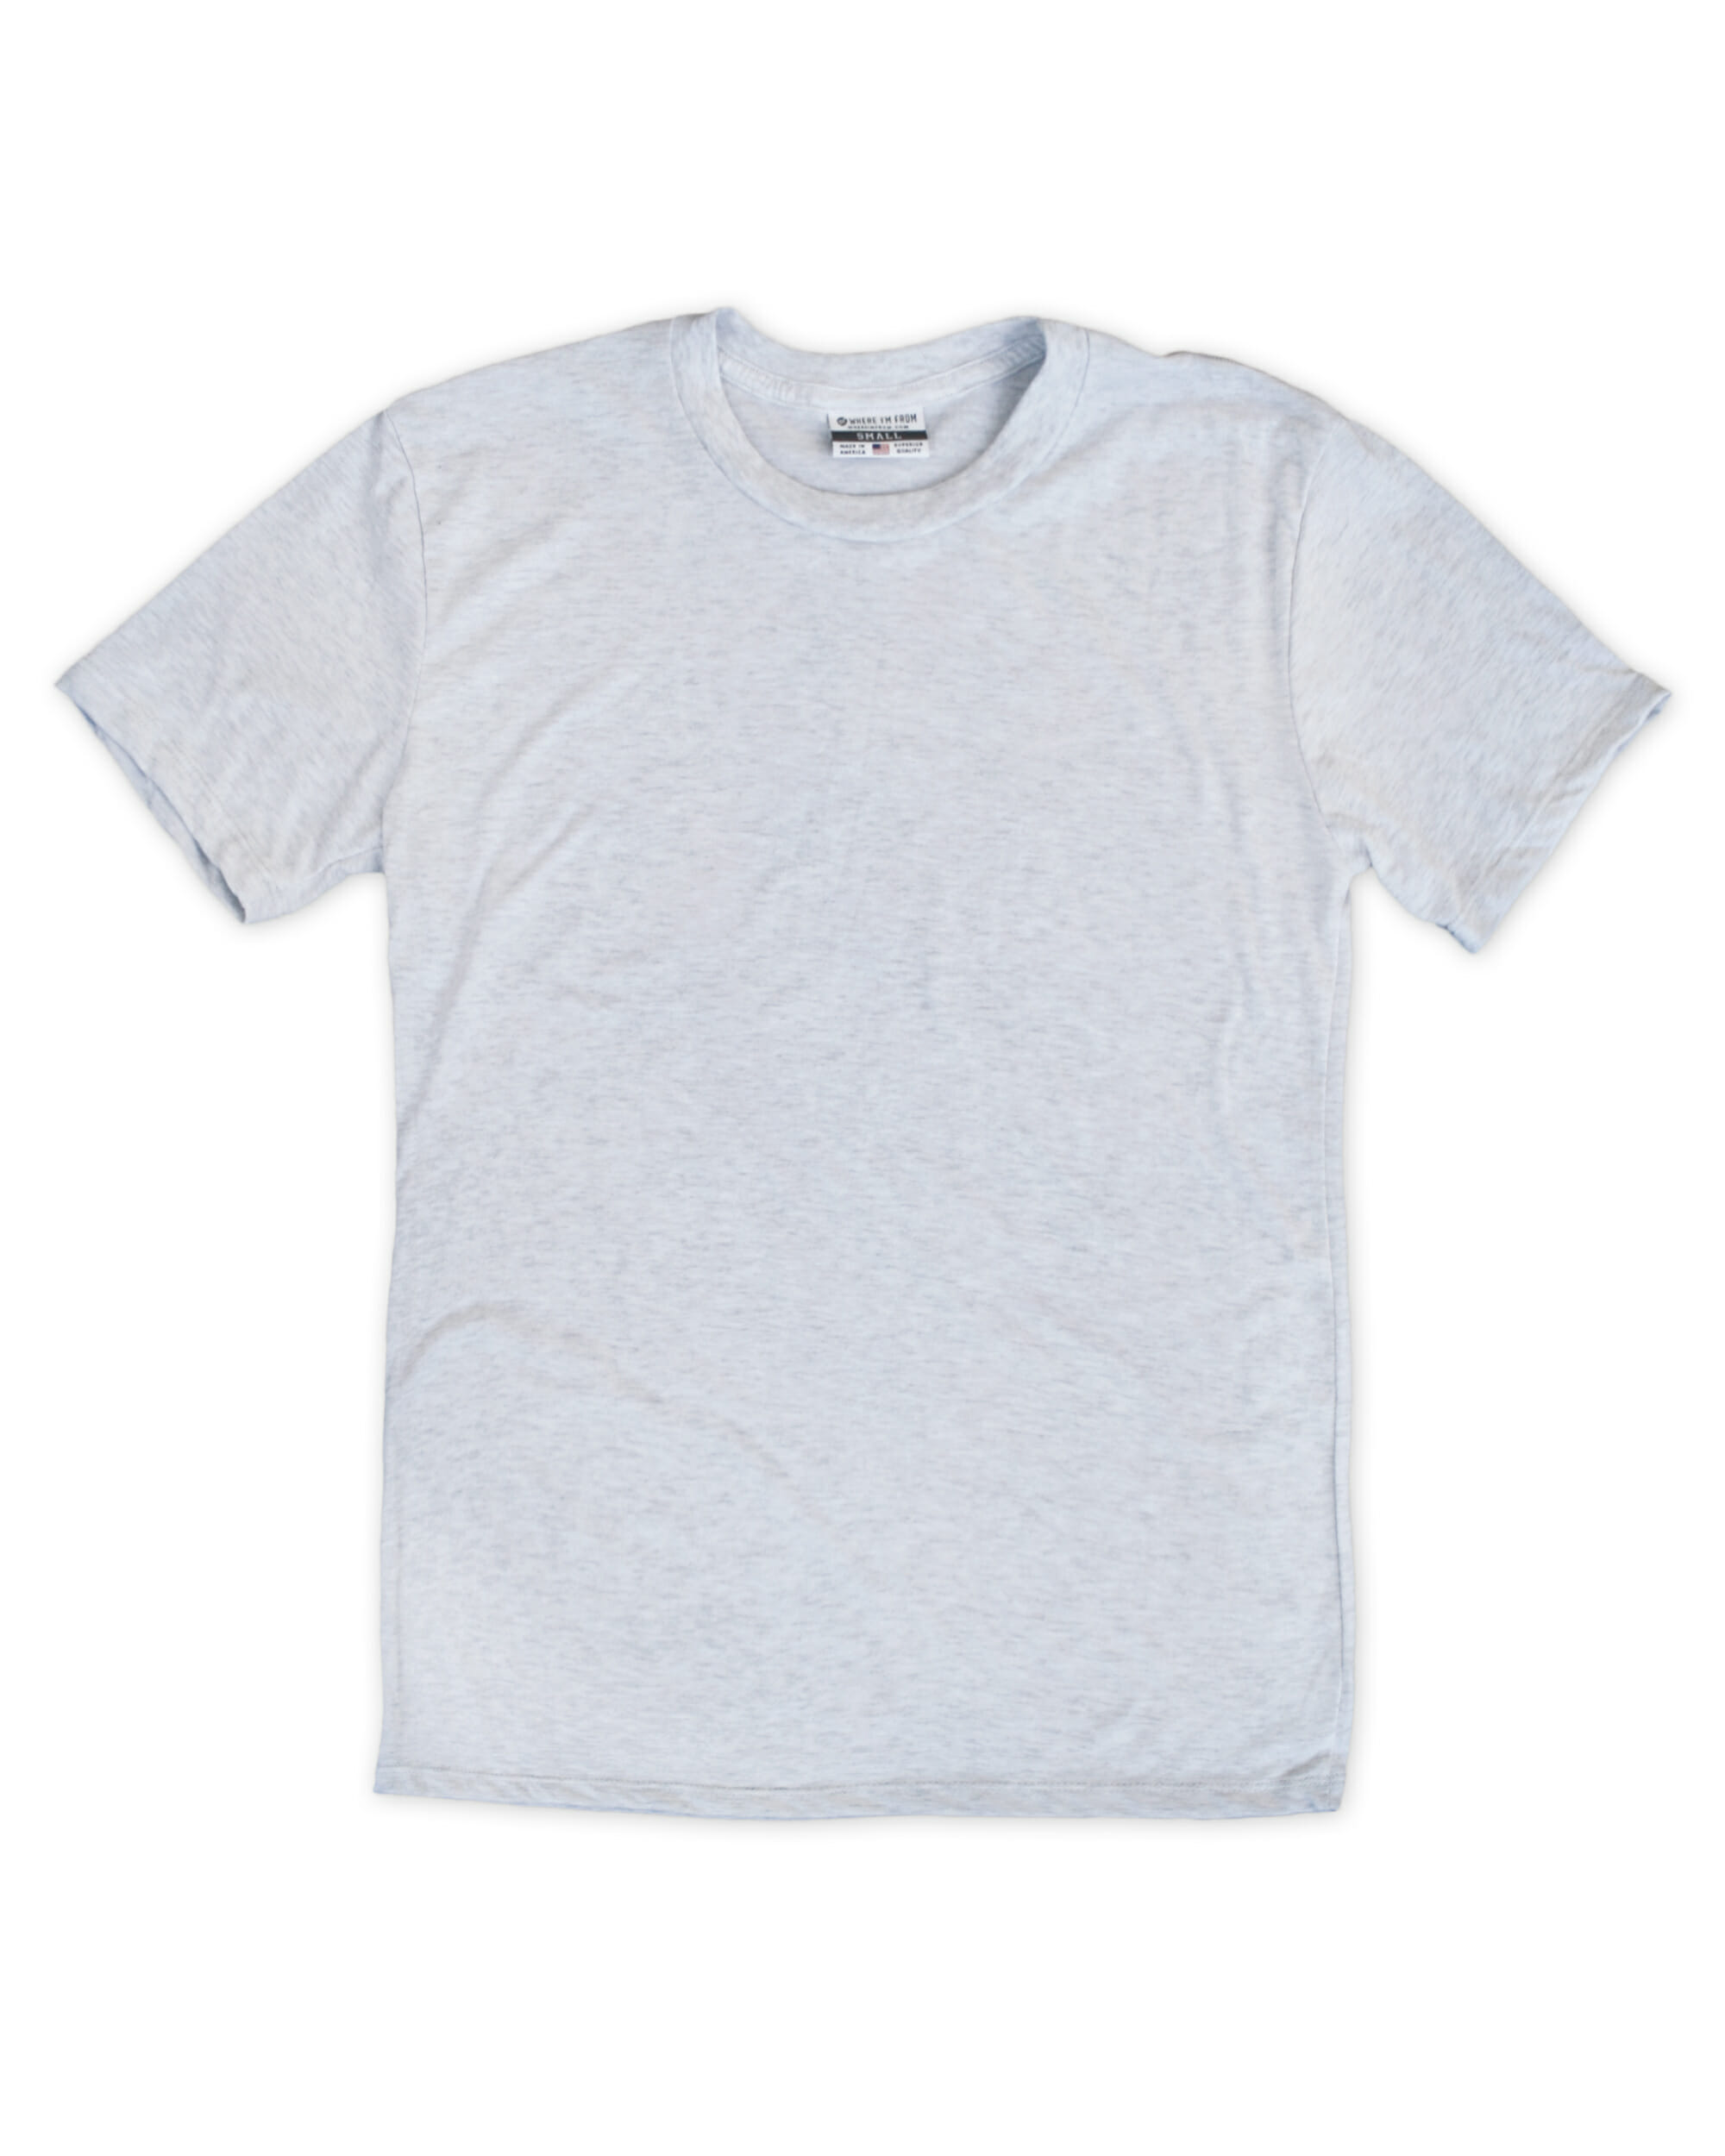 The Ash White Blank Tee - Where I'm From